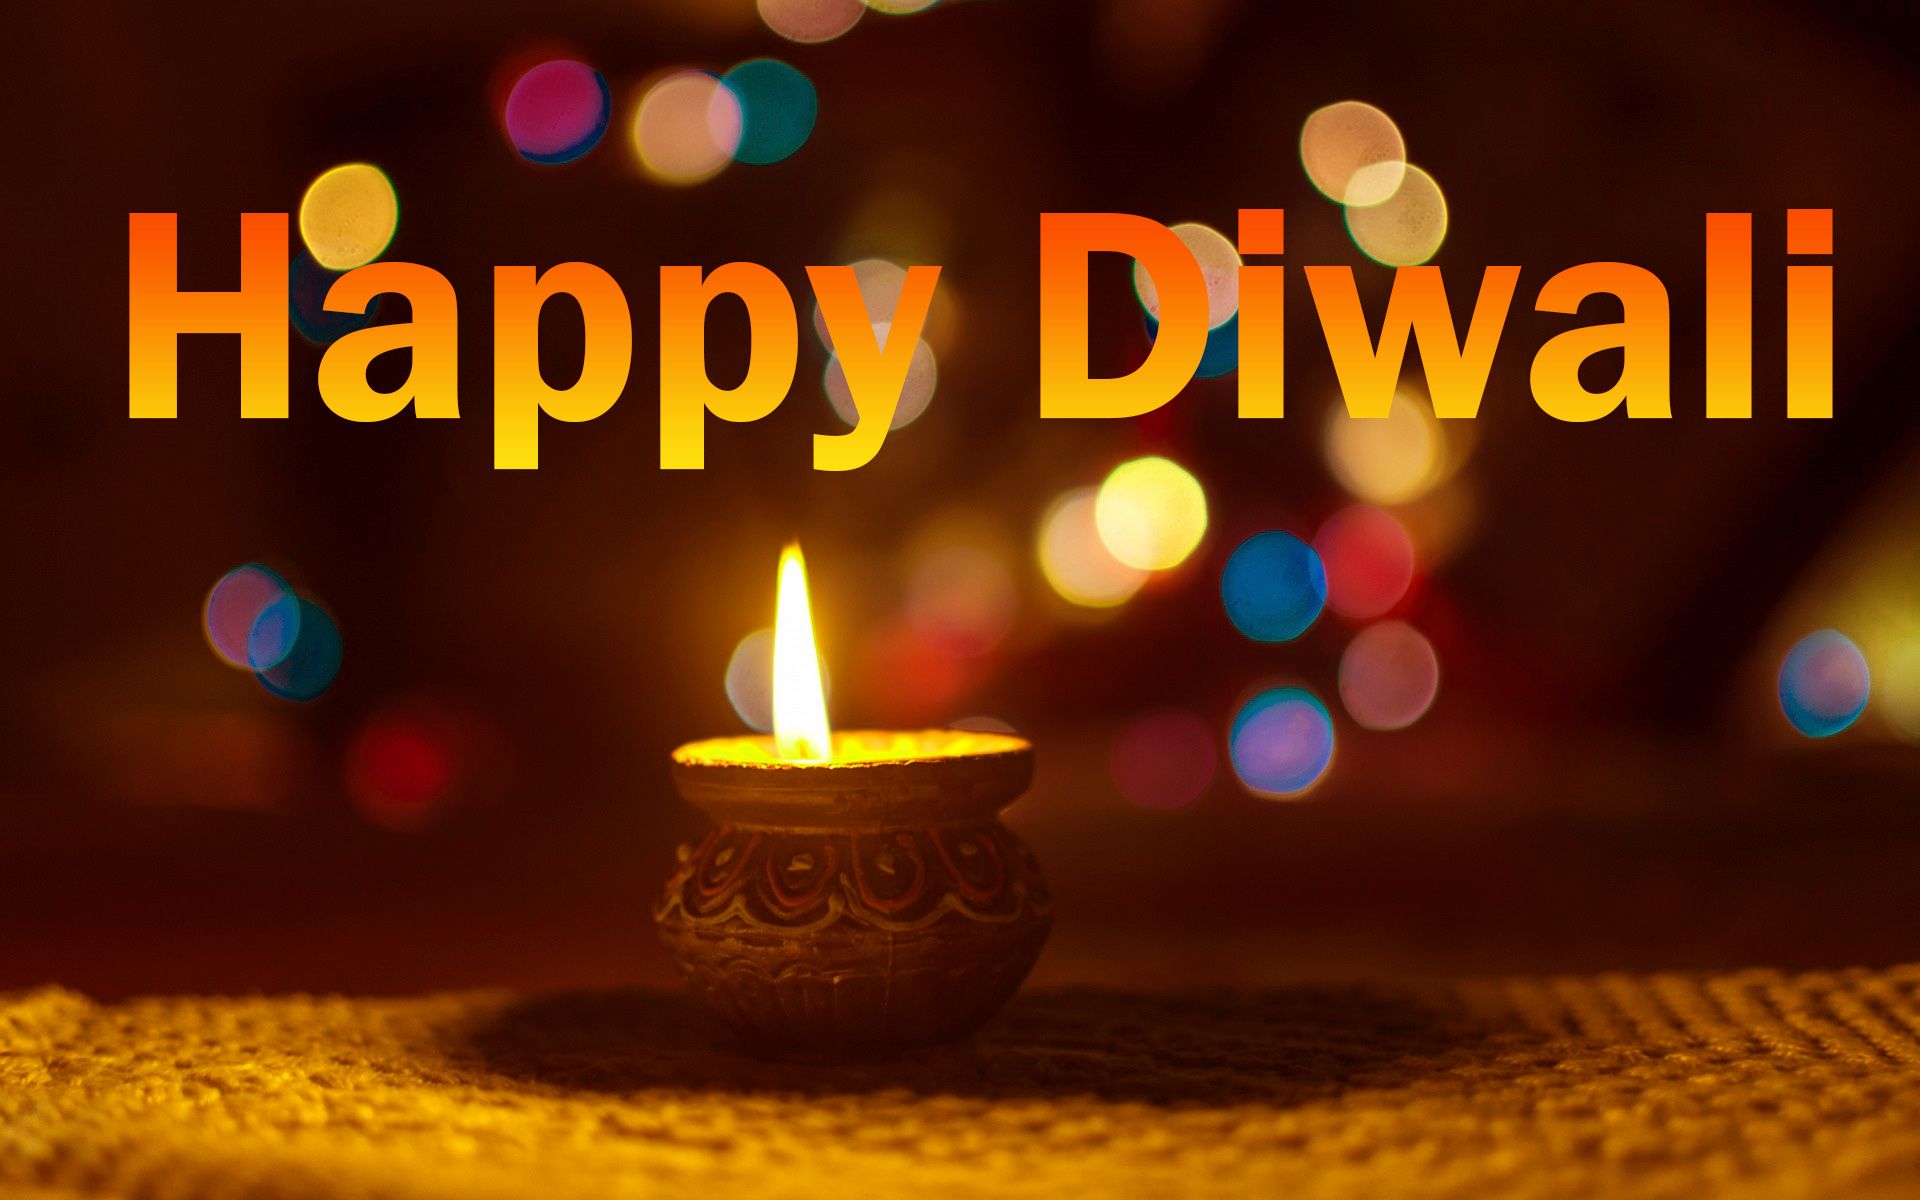 Happy Diwali 2021 Quotes, wishes, Messages, Image